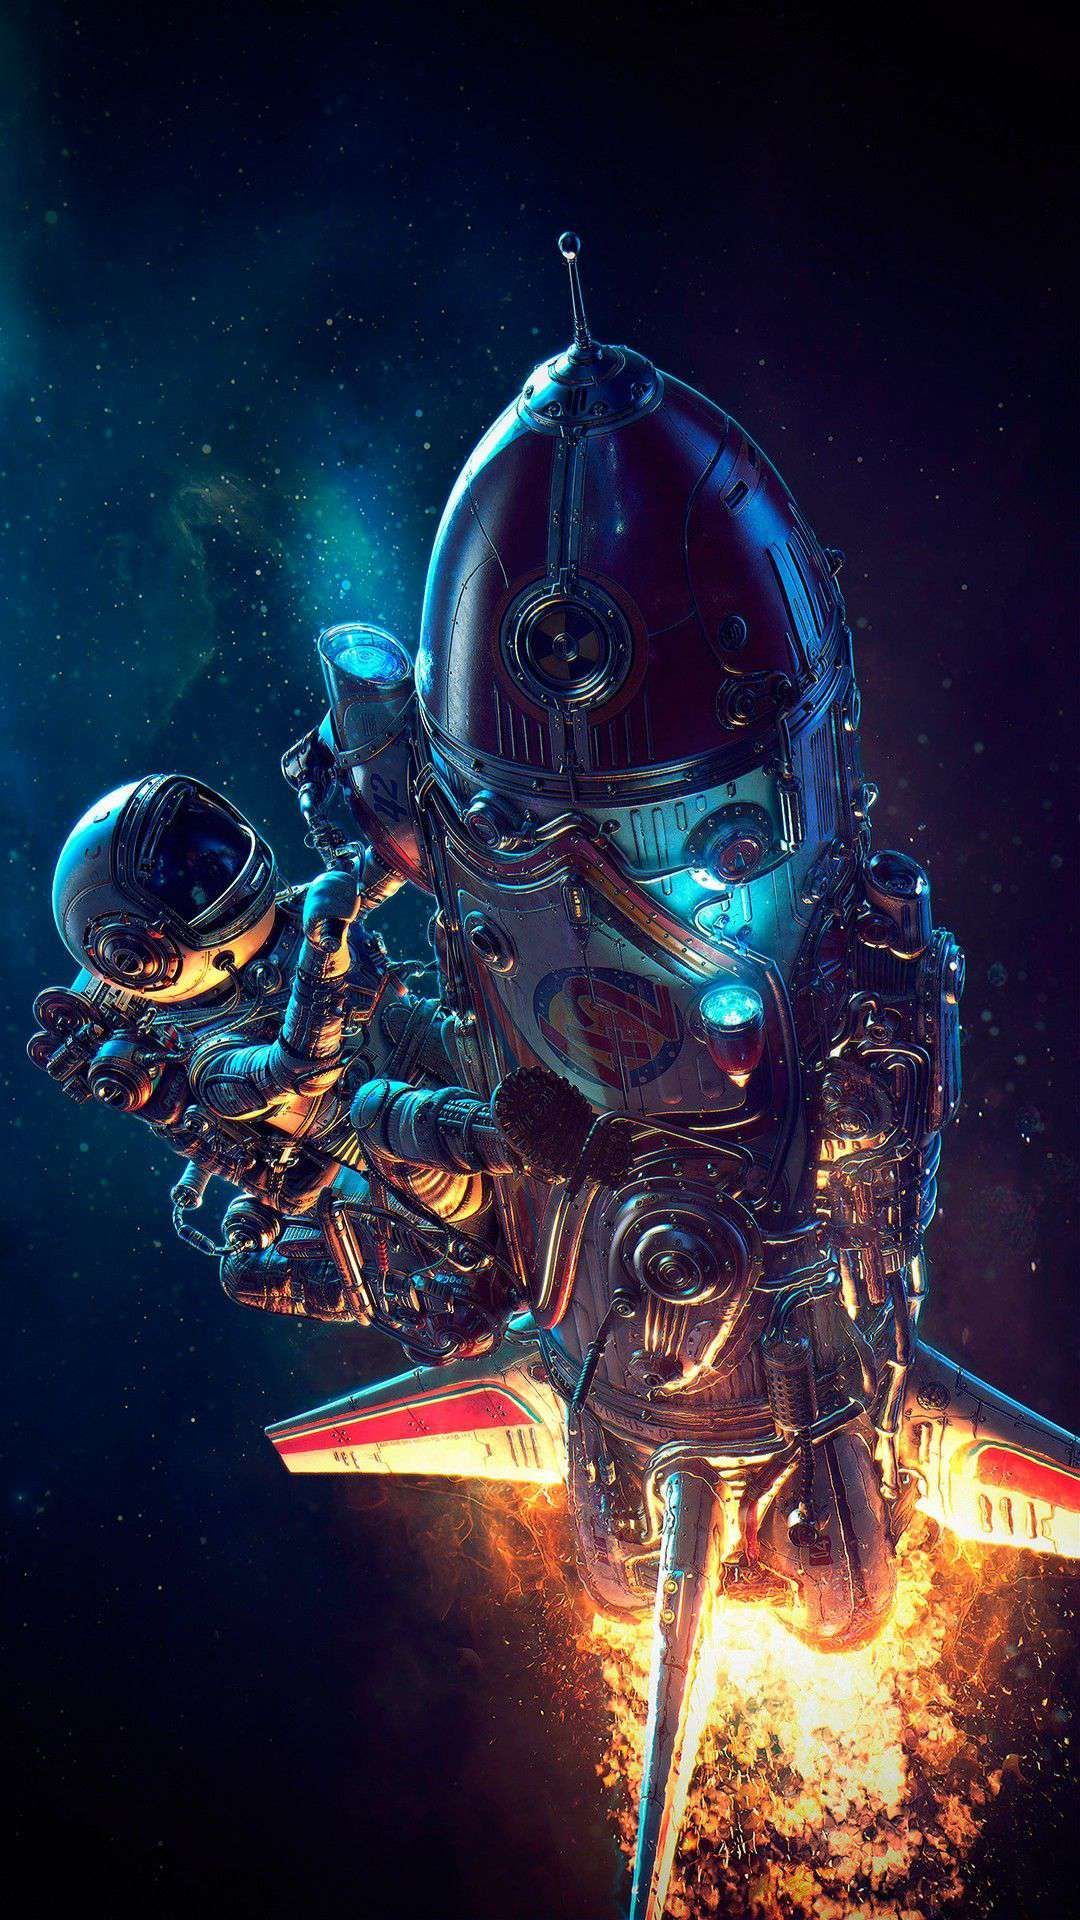 Space Astronaut on Rocket Ship iPhone Wallpaper. Astronaut wallpaper, Astronaut art, Space artwork